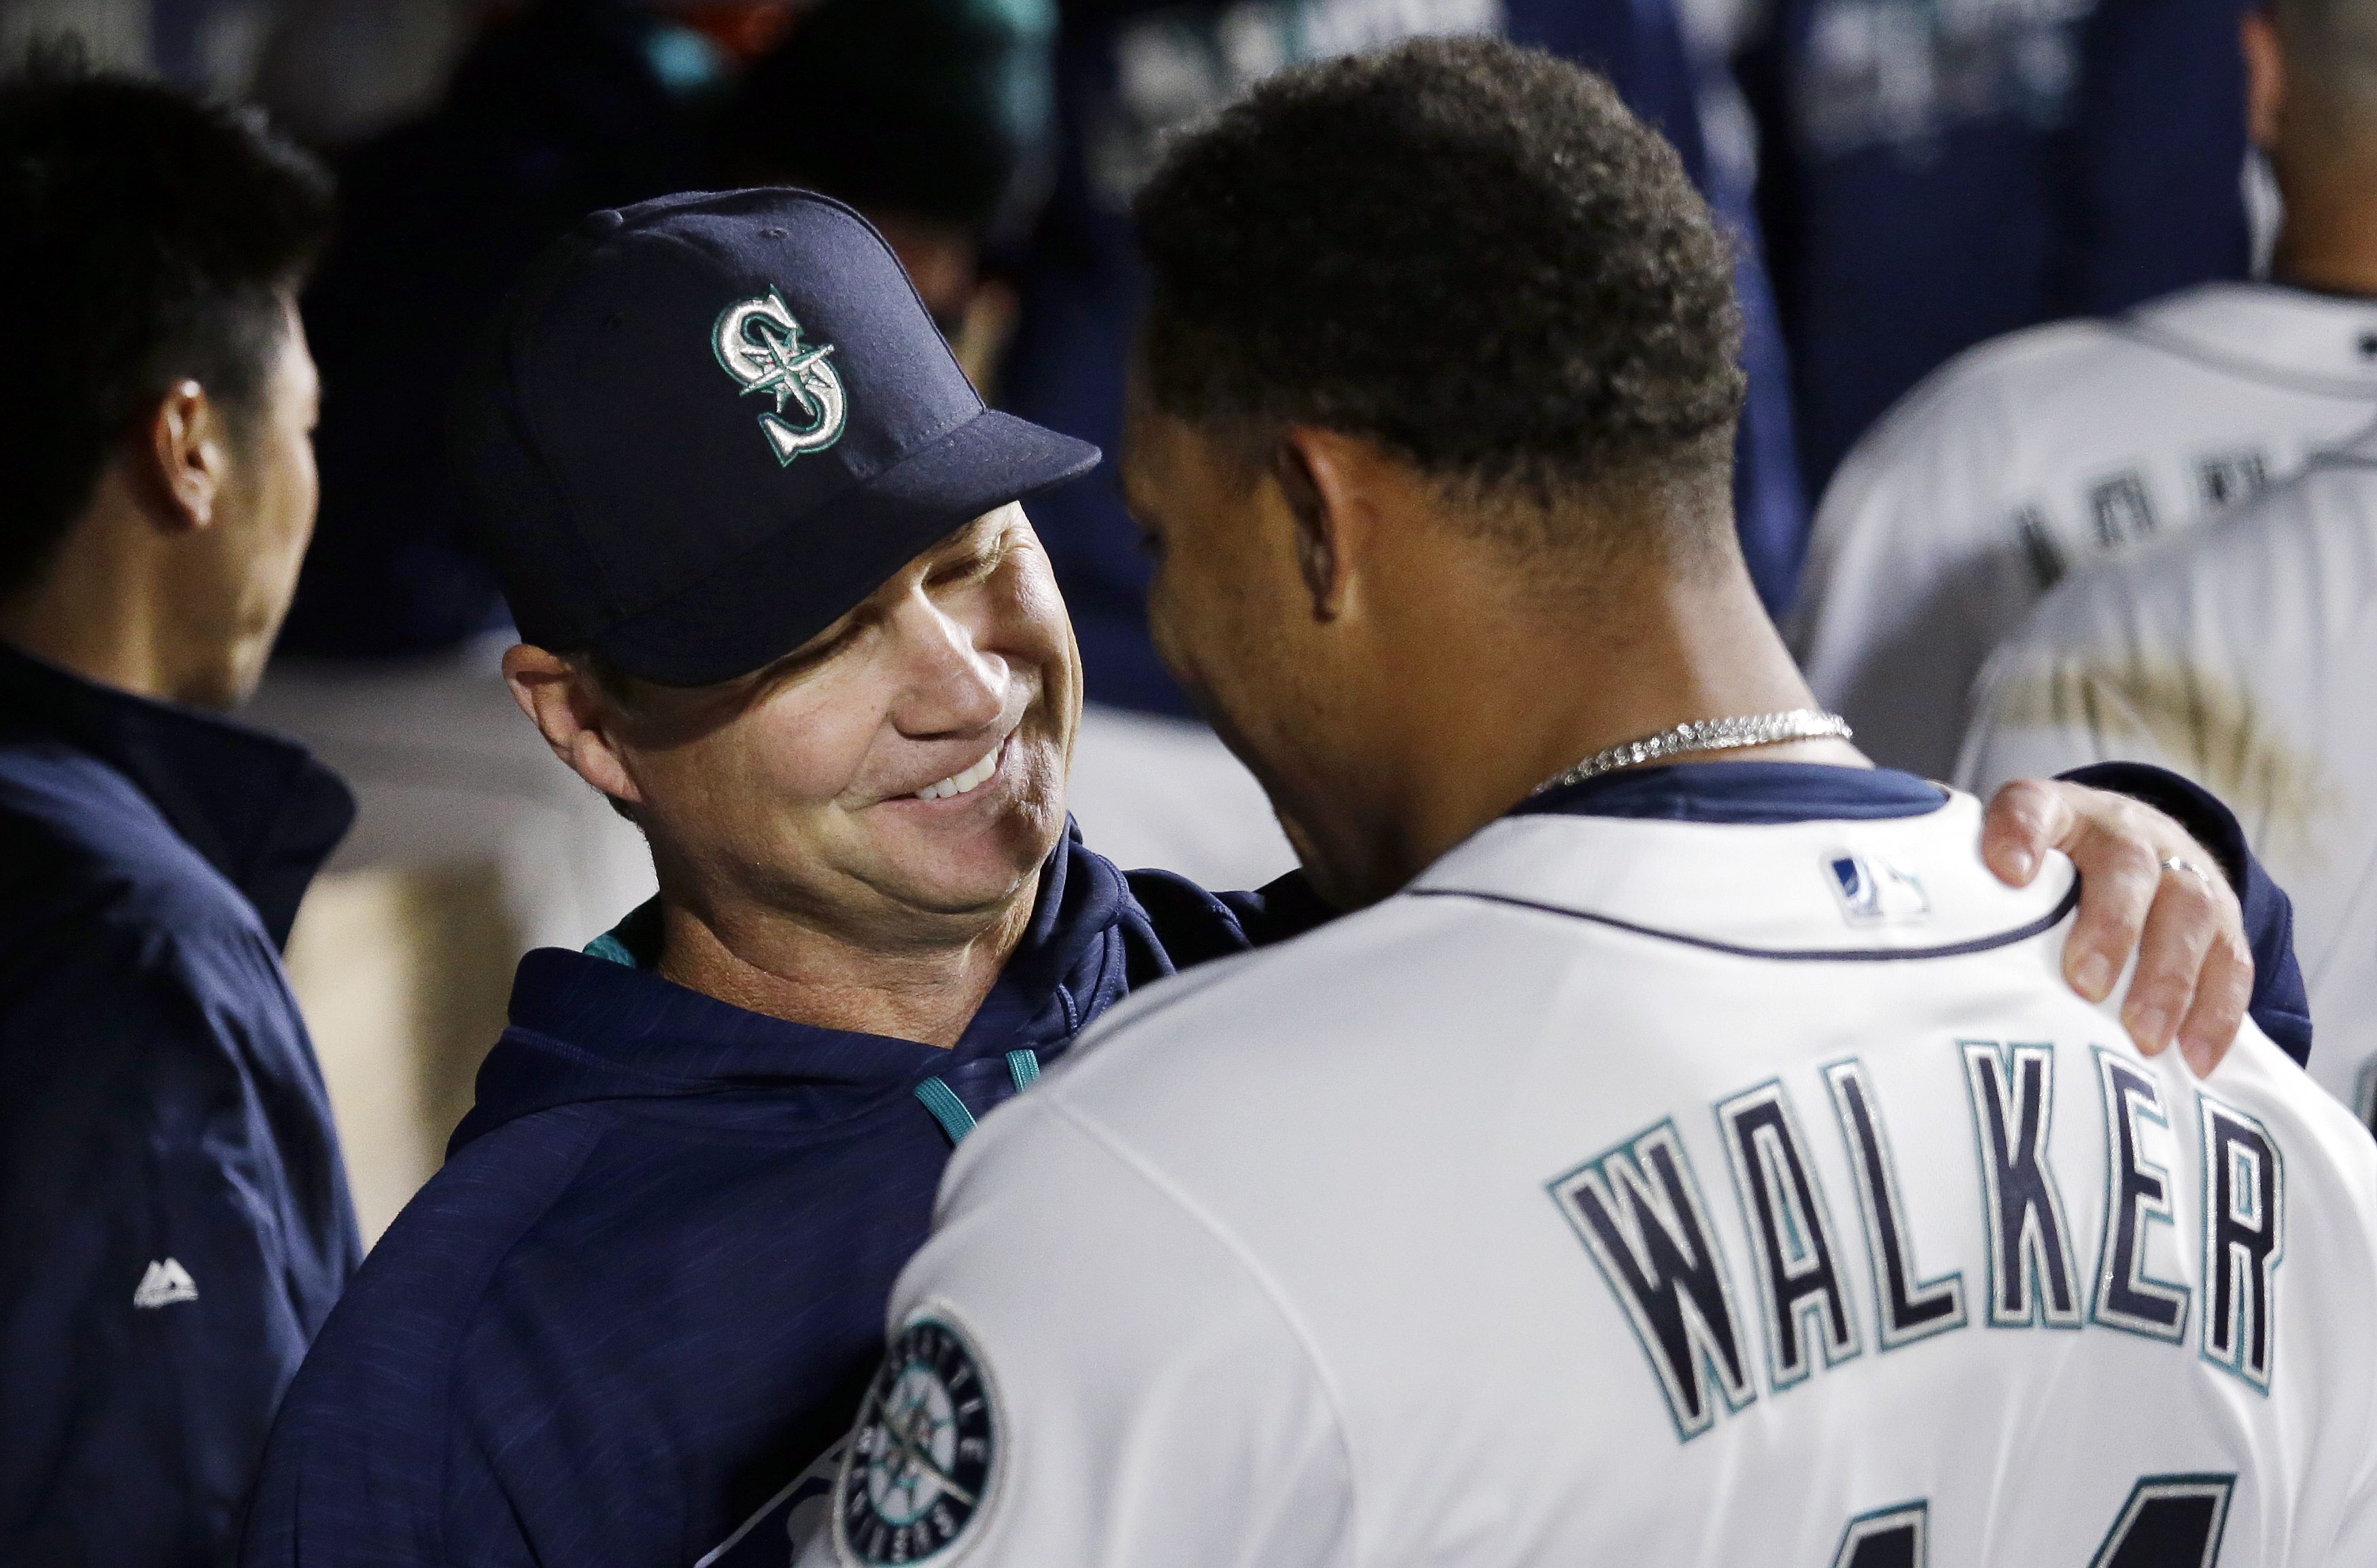 Seattle Mariners manager Scott Servais, left, embraces starting pitcher Taijuan Walker after Walker struck out the Houston Astros side in the seventh inning of a baseball game Monday, April 25, 2016, in Seattle.